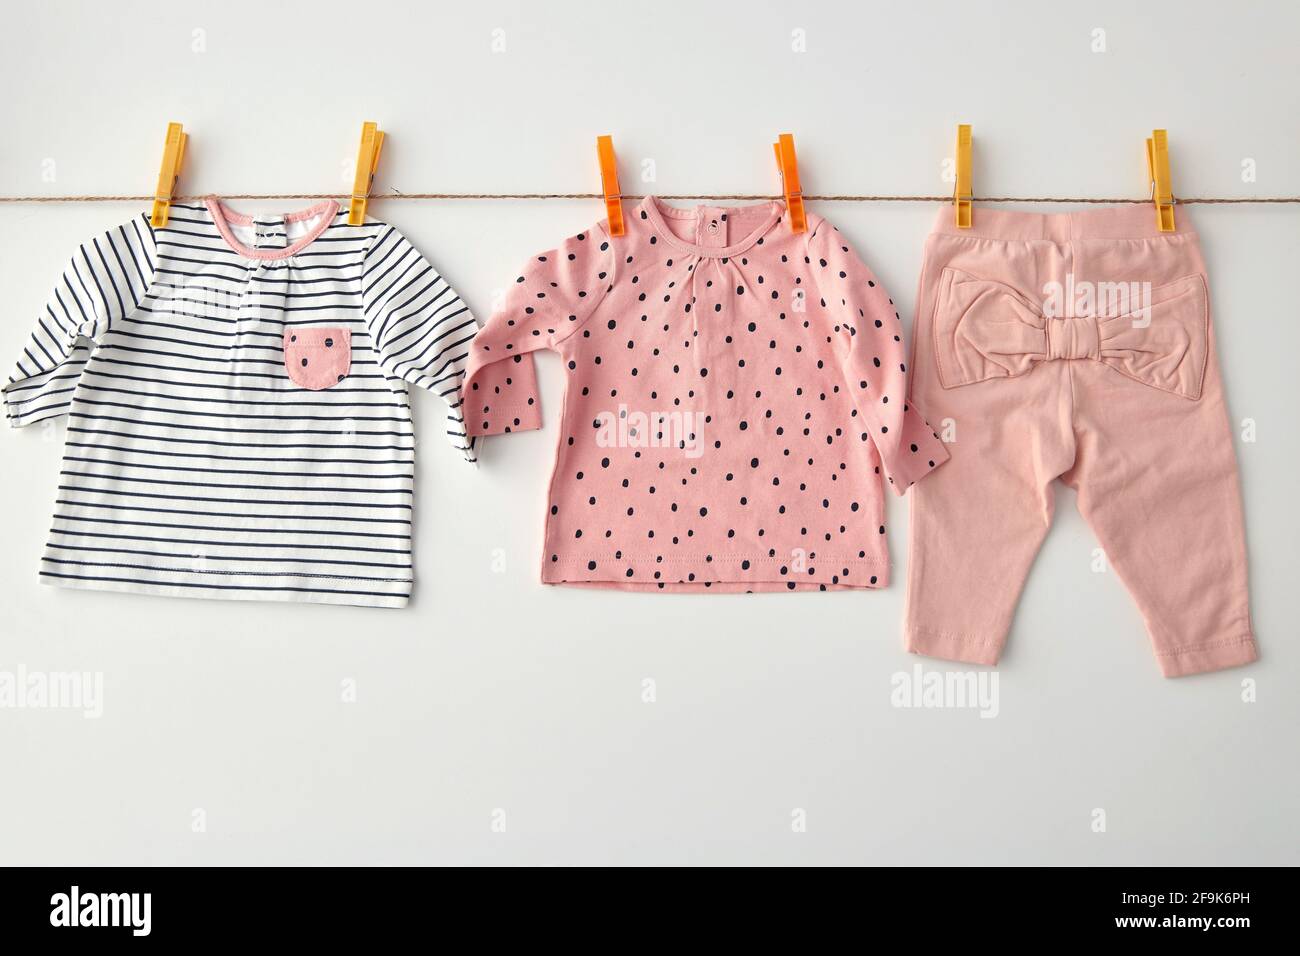 shirts and pants for baby girl on clothesline Stock Photo